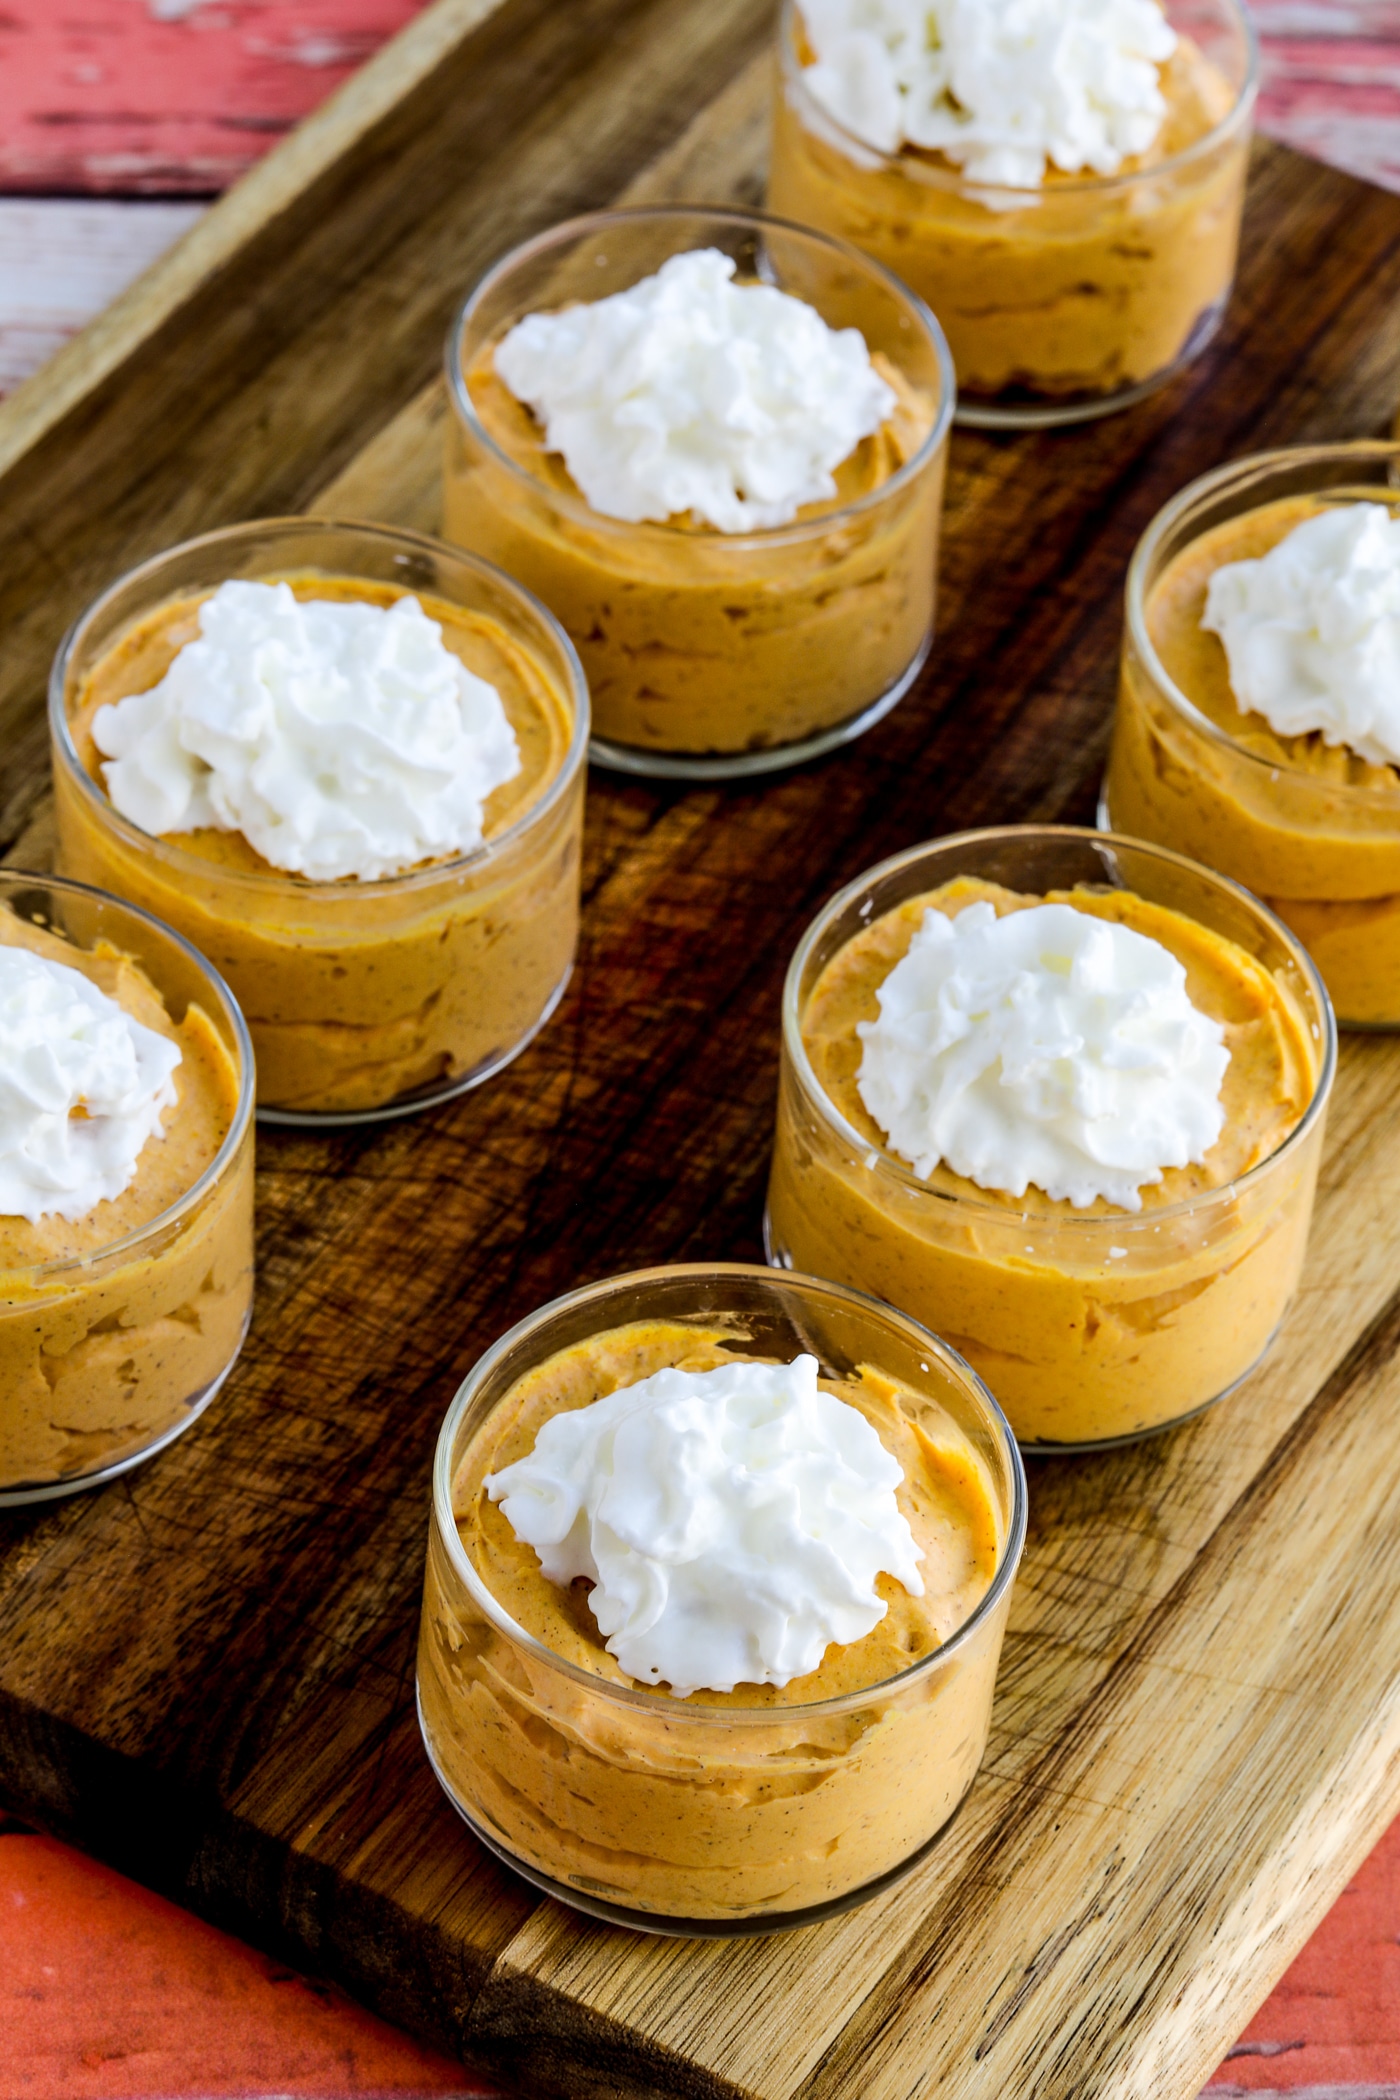 Sugar-free pumpkin pudding is ready to serve